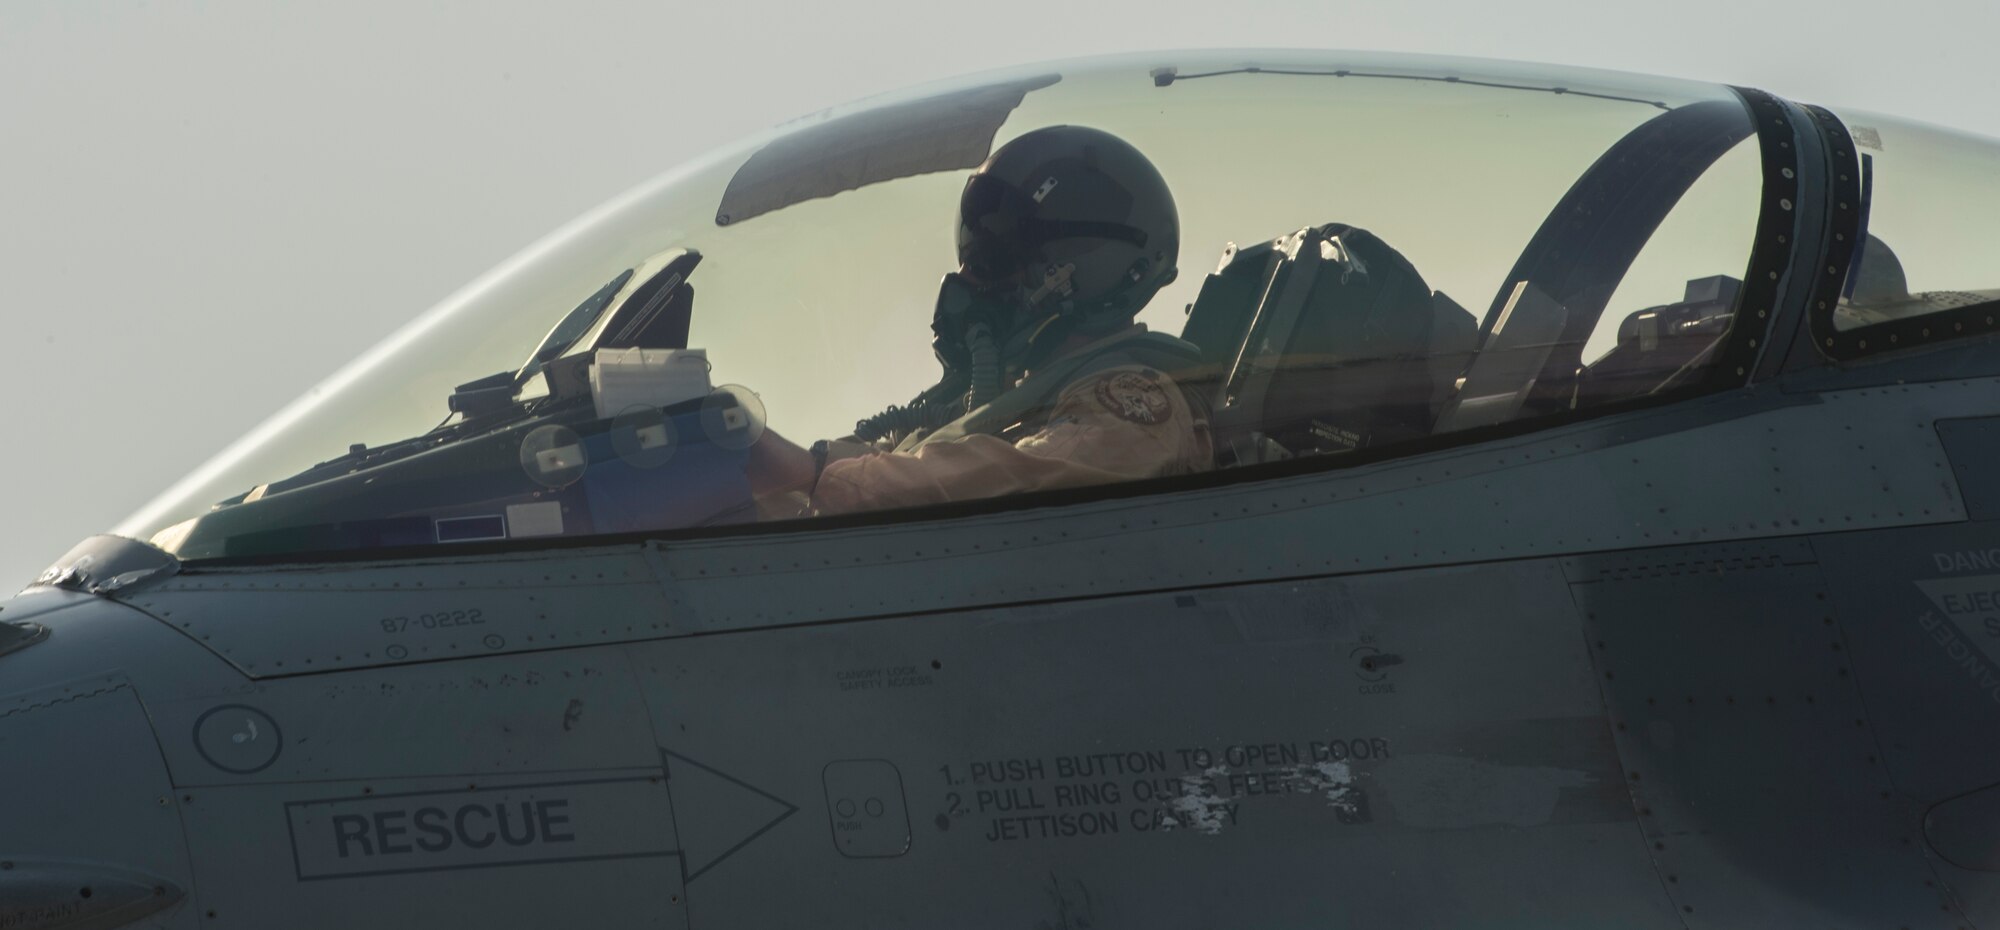 An F-16 Fighting Falcon pilot from the 100th Fighter Squadron arrives at the 407th Air Expeditionary Group in Southwest Asia, Oct. 16, 2017. In an air-to-surface role, the F-16 can fly more than 500 miles, deliver its weapons with superior accuracy, defend itself against enemy aircraft and return to its starting point. (U.S. Air Force photo by Staff Sgt. Sean Martin/Released)